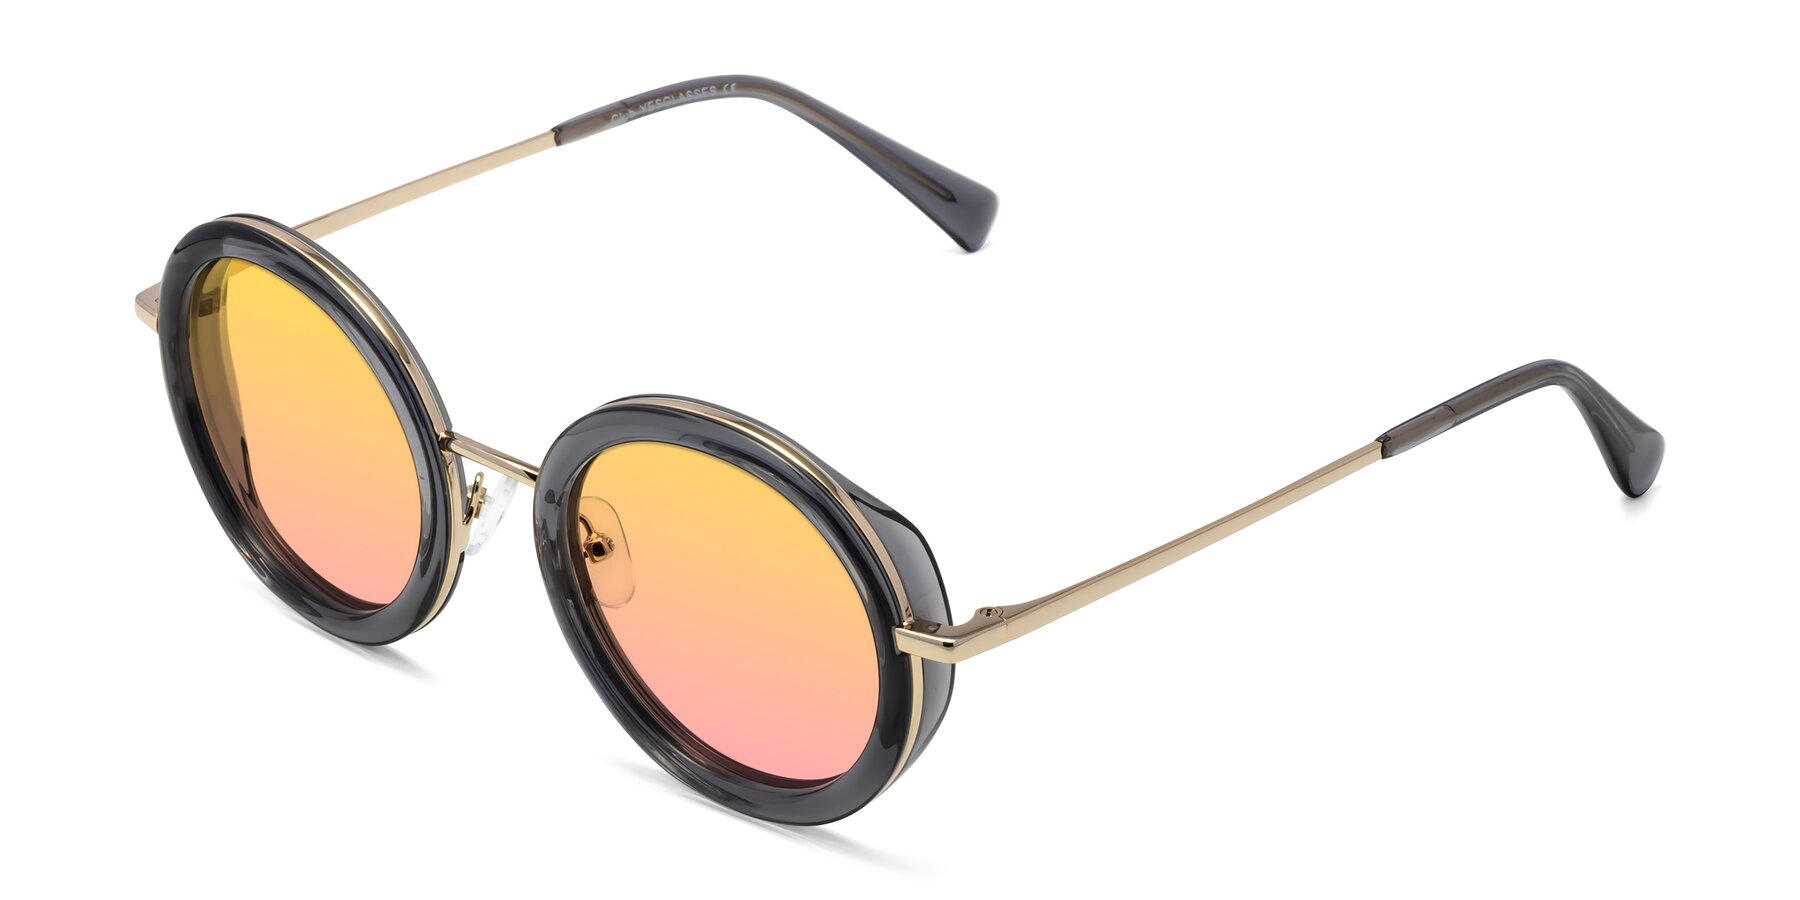 Angle of Club in Gray-Gold with Yellow / Pink Gradient Lenses